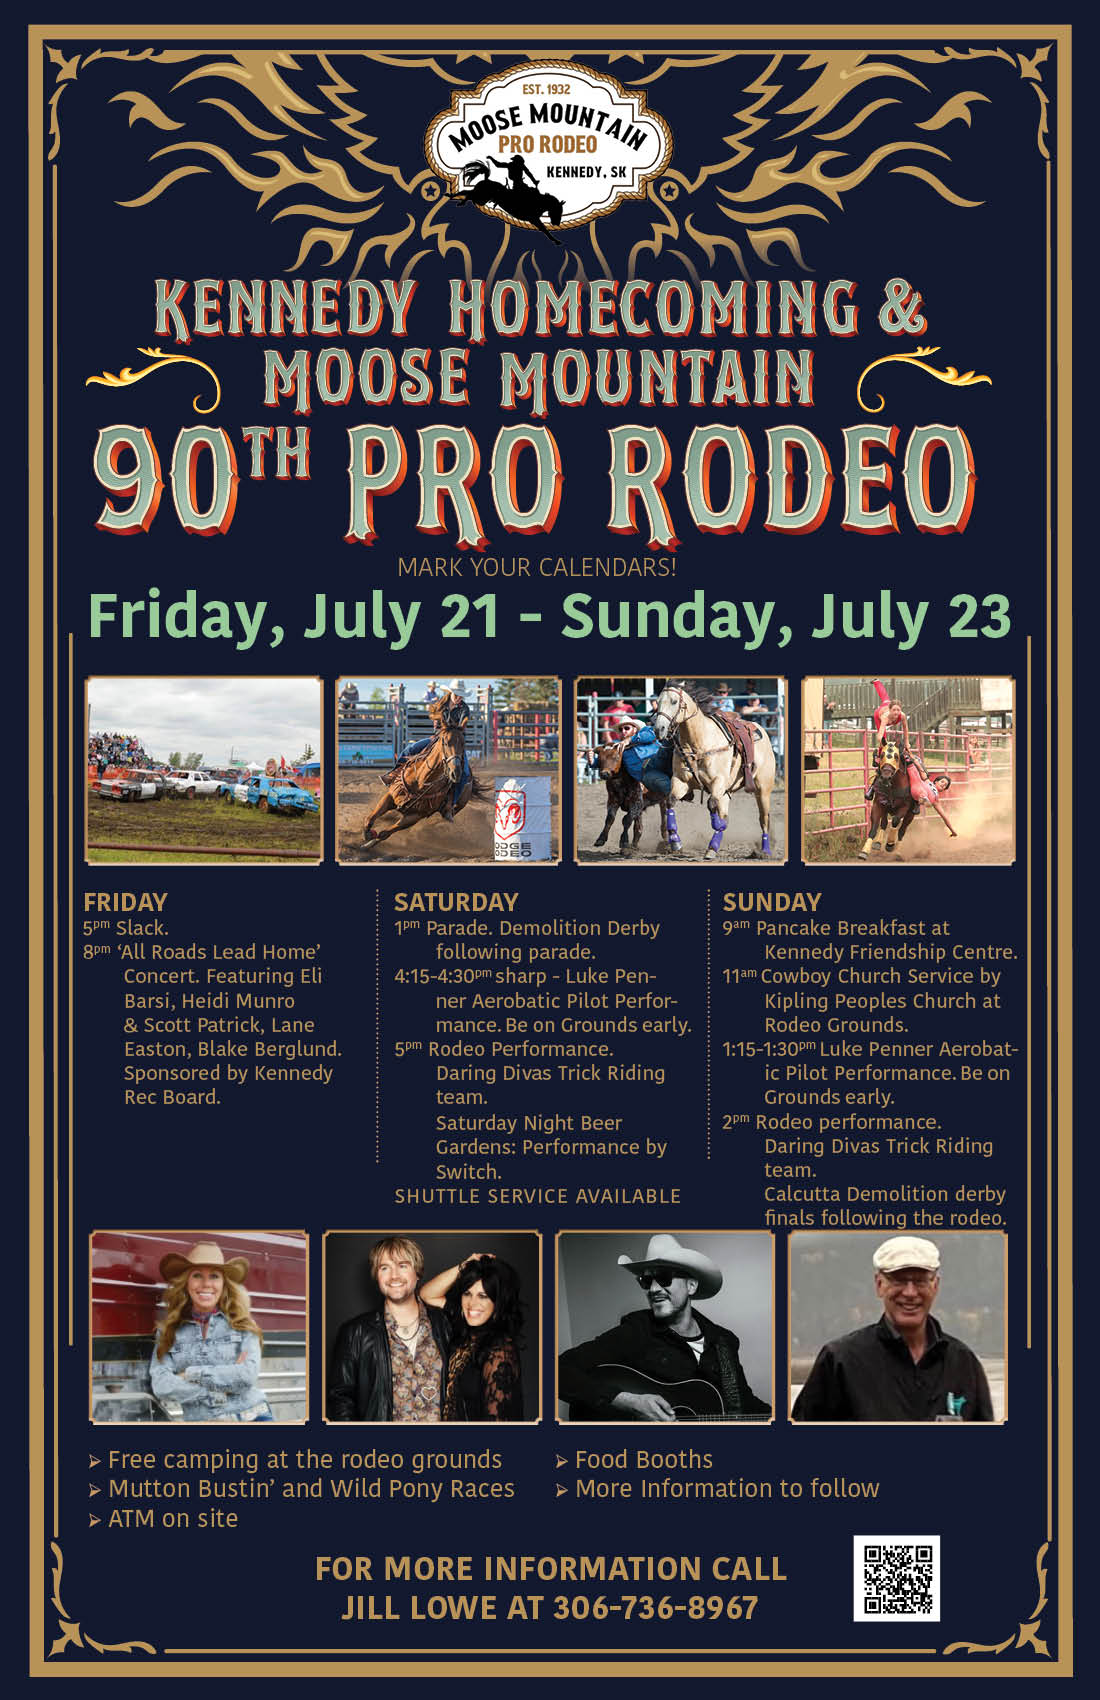 Kennedy Homecoming & Moose Mountain 90th Rodeo